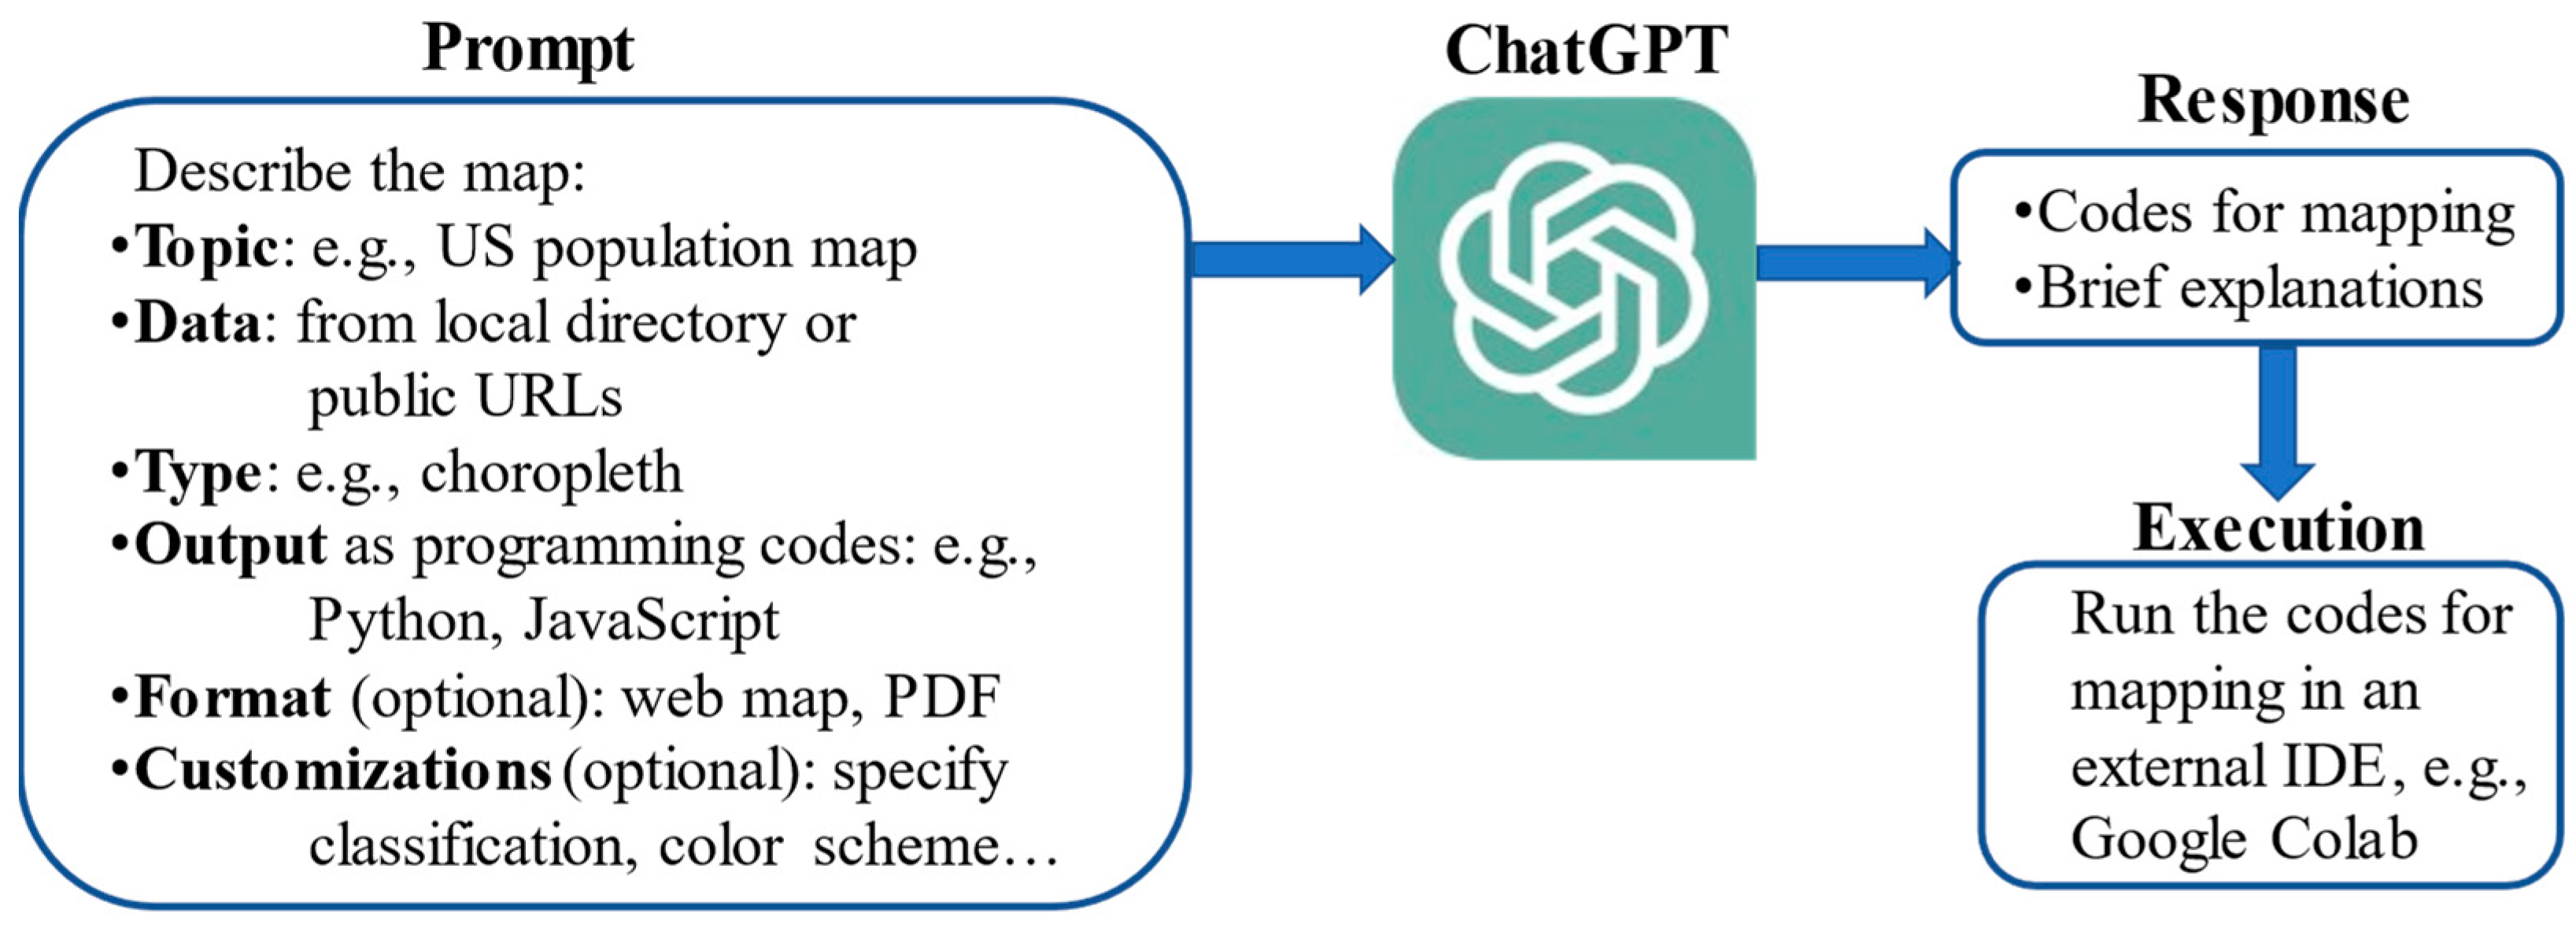 Experimenting with using ChatGPT as a simulation application